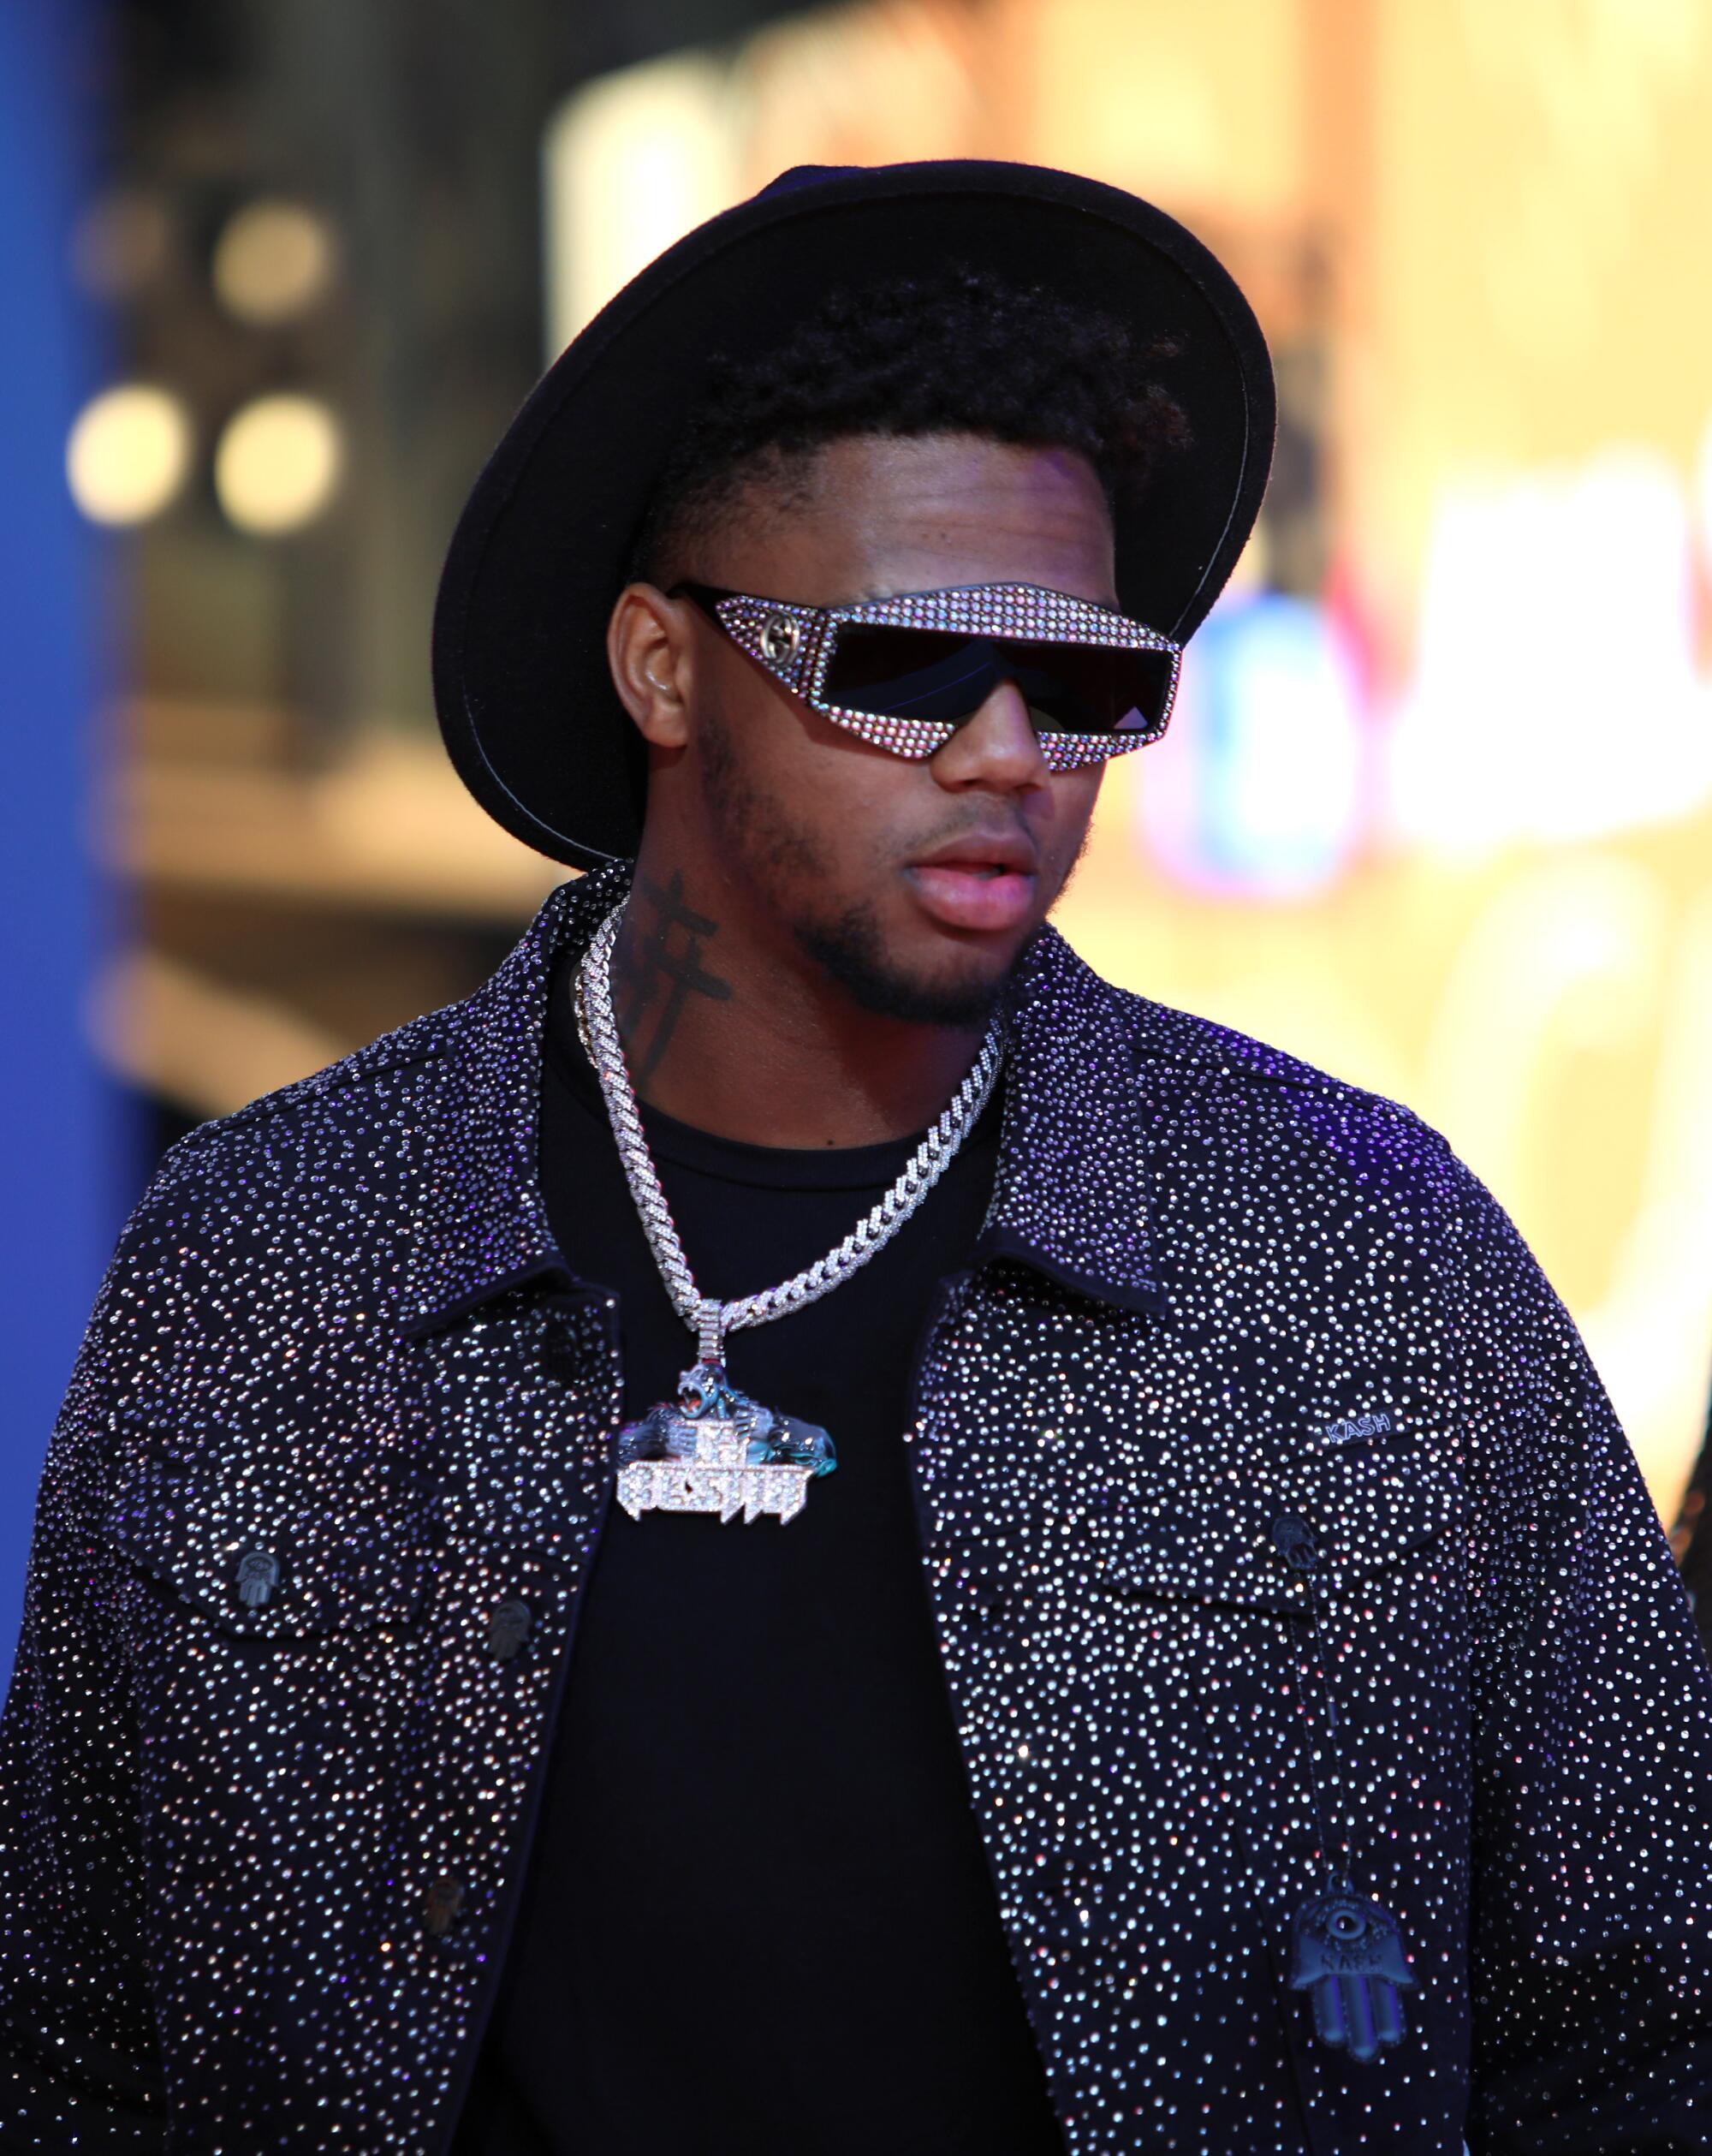 Ronald Acuna Jr. in a black and silver jacket arrives at the 2022 MLB All-Star Game Red Carpet Show.